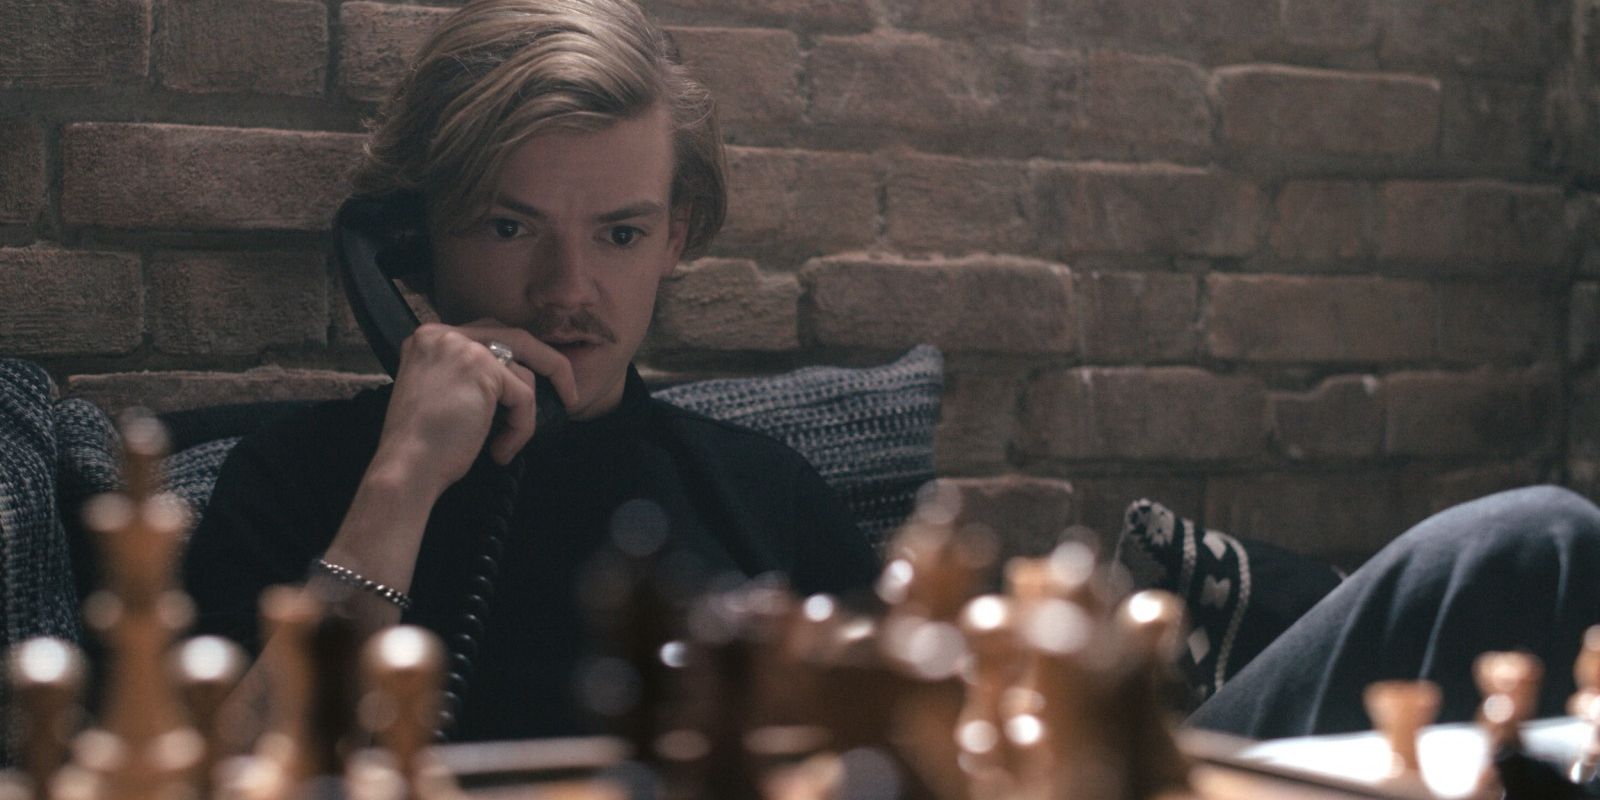 Benny on the phone seated next to a chessboard in The Queen's Gambit